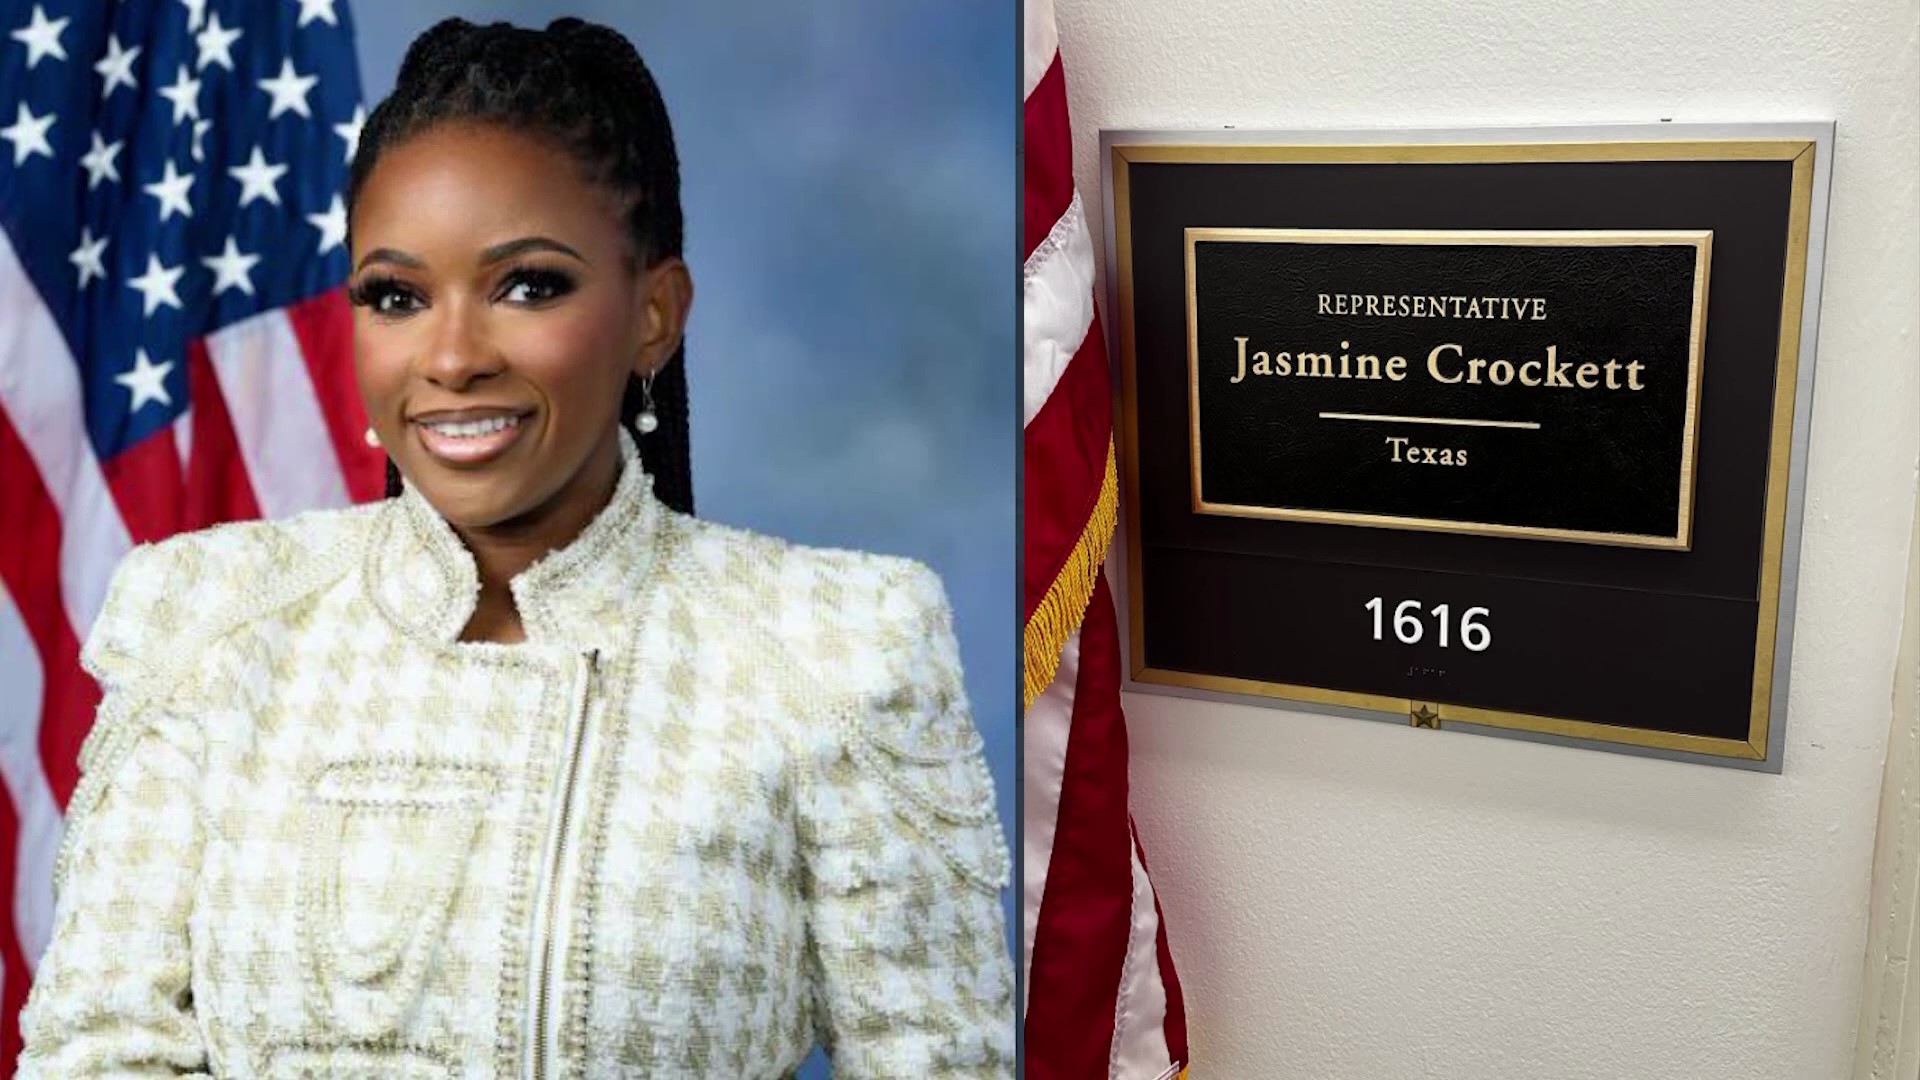 U.S. Rep. Jasmine Crockett represents District 30, which had been represented by retired congresswoman Eddie Bernice Johnson for over 30 years.